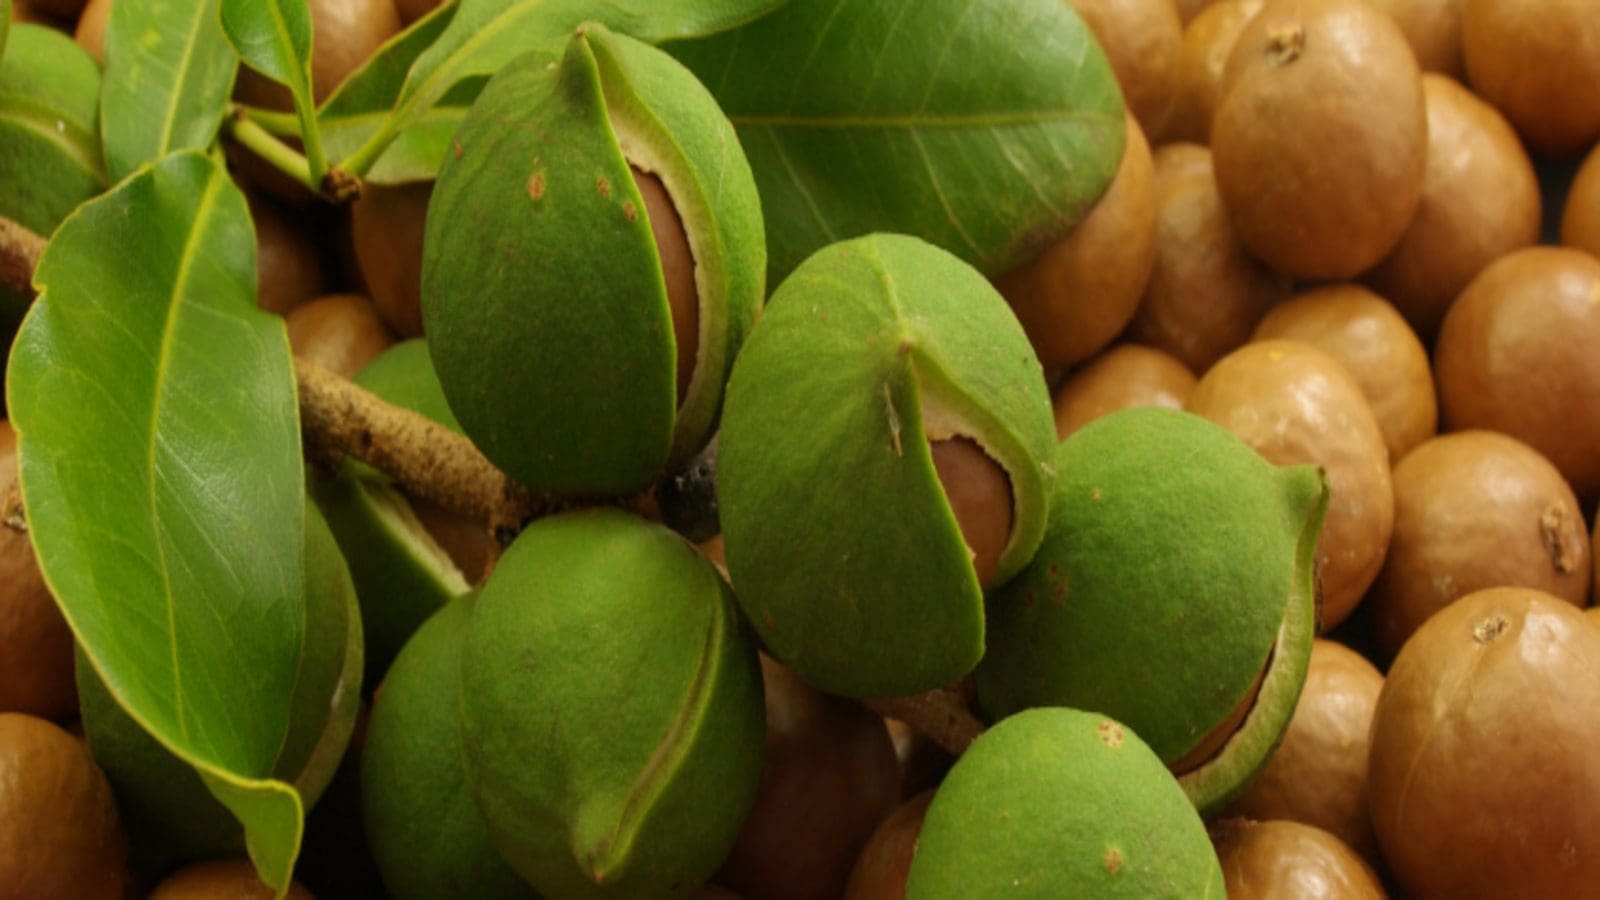 Good tidings for macadamia farmers as the government lifts an eight-year ban on the export of raw nuts